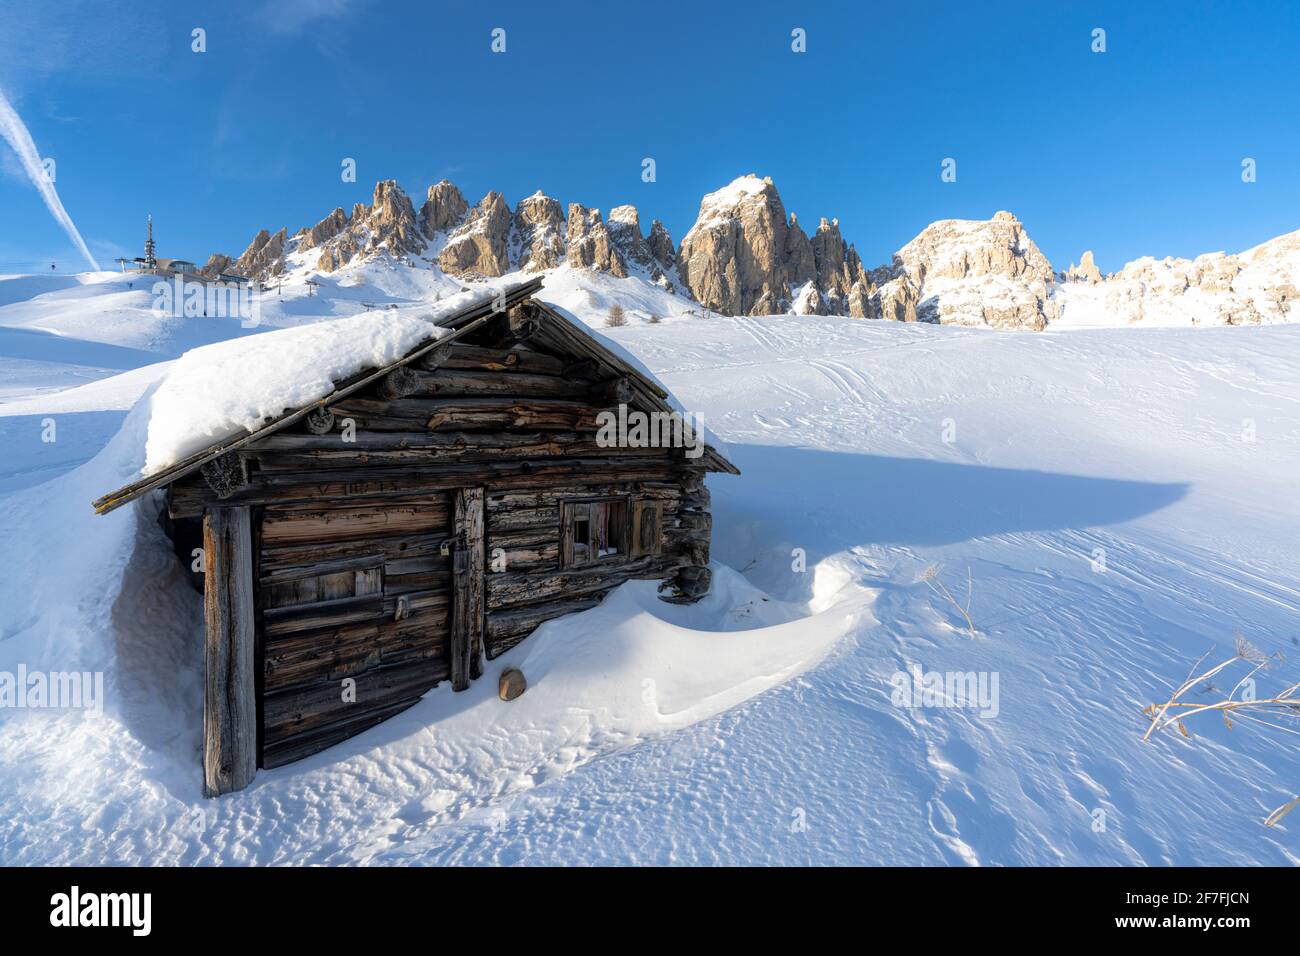 Isolated wooden hut covered with snow with Cir Group peaks in background at sunset, Passo Gardena, Dolomites, South Tyrol, Italy, Europe Stock Photo